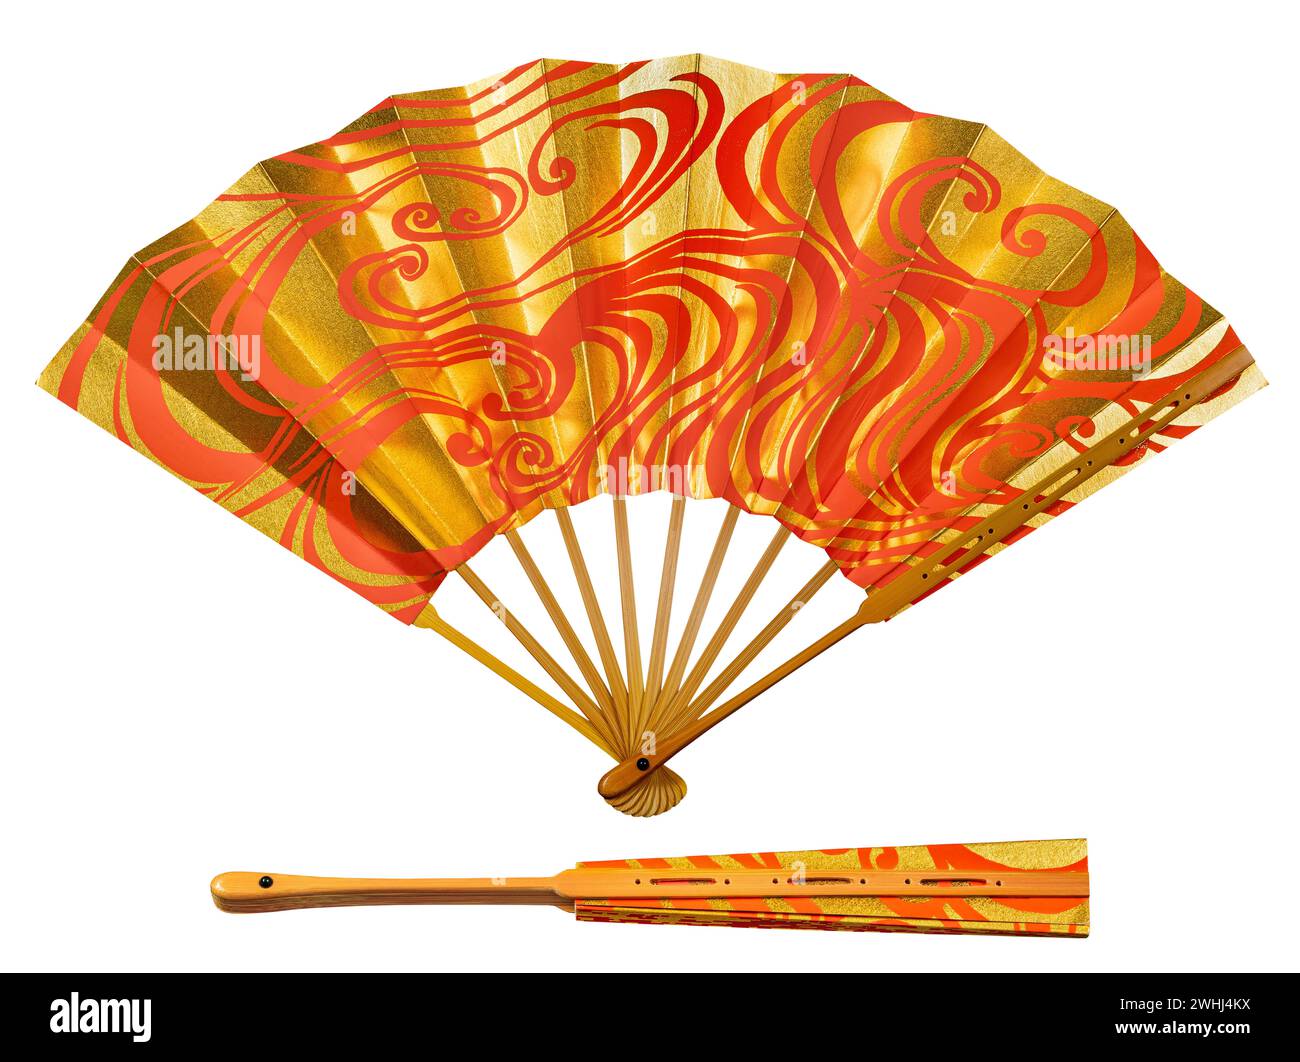 Japanese traditional hand fan from paper and bamboo with gold and red ornament, isolated on white. Stock Photo